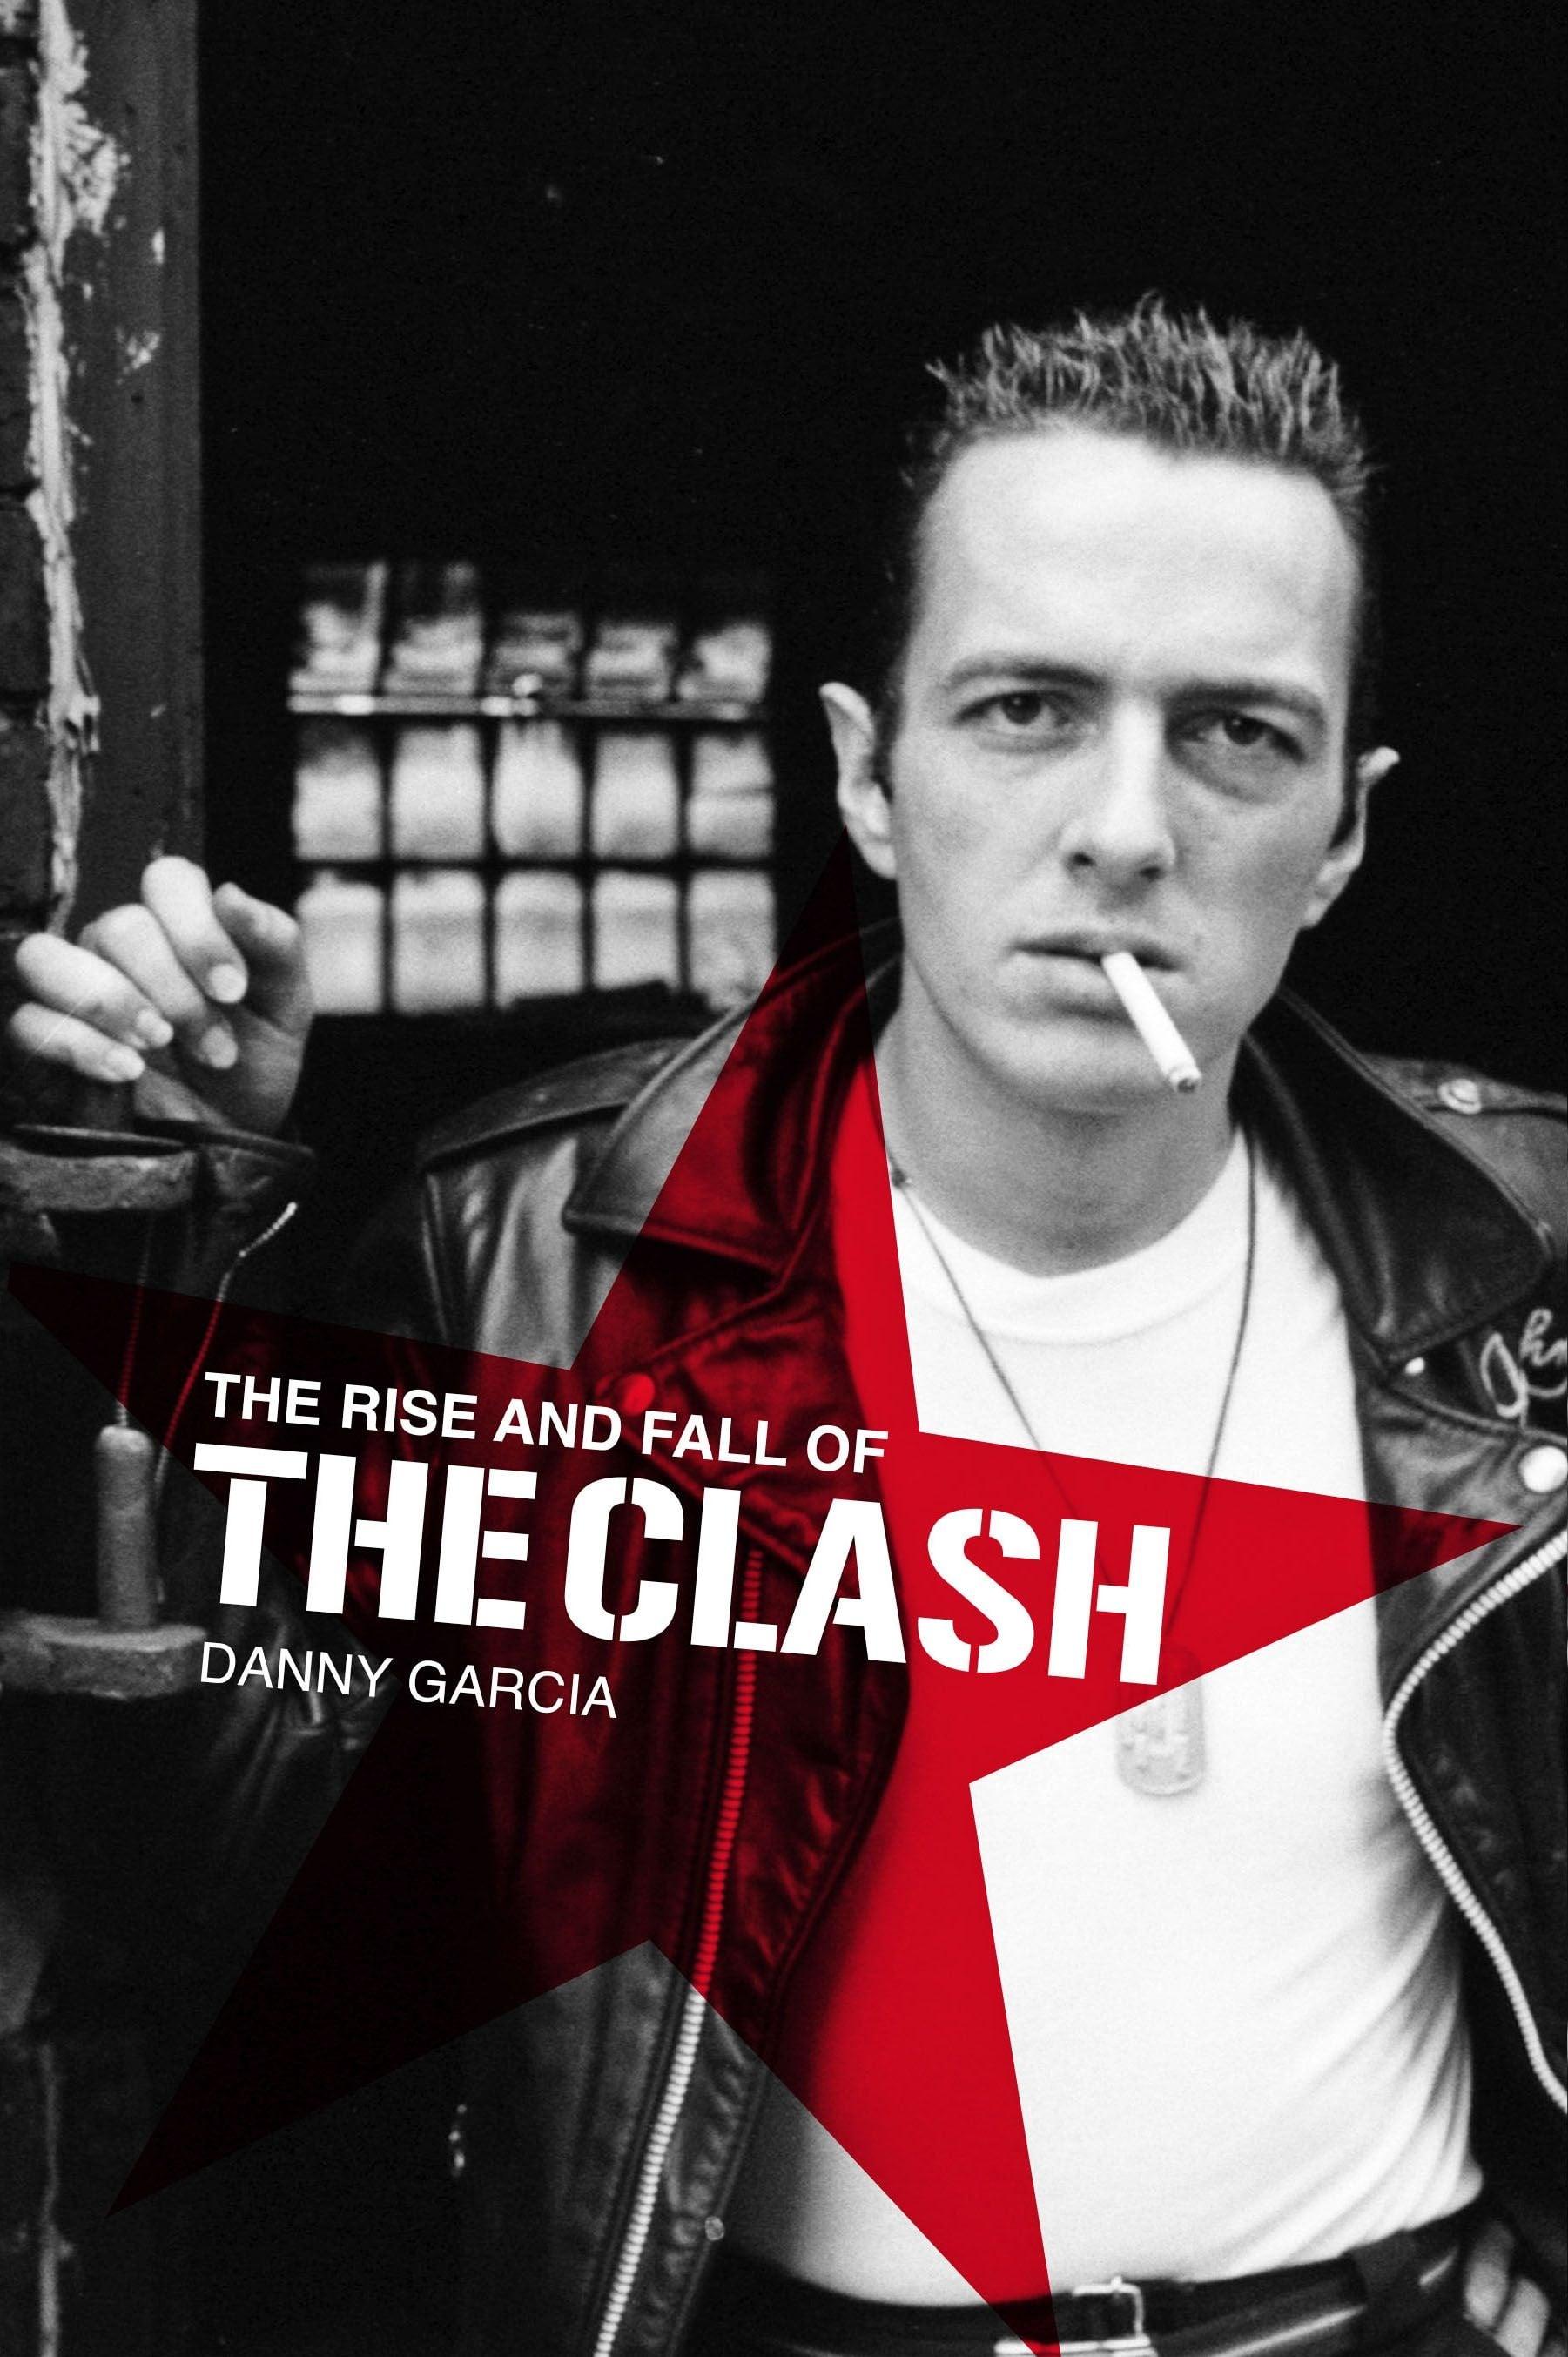 The Clash: The Rise and Fall of The Clash poster